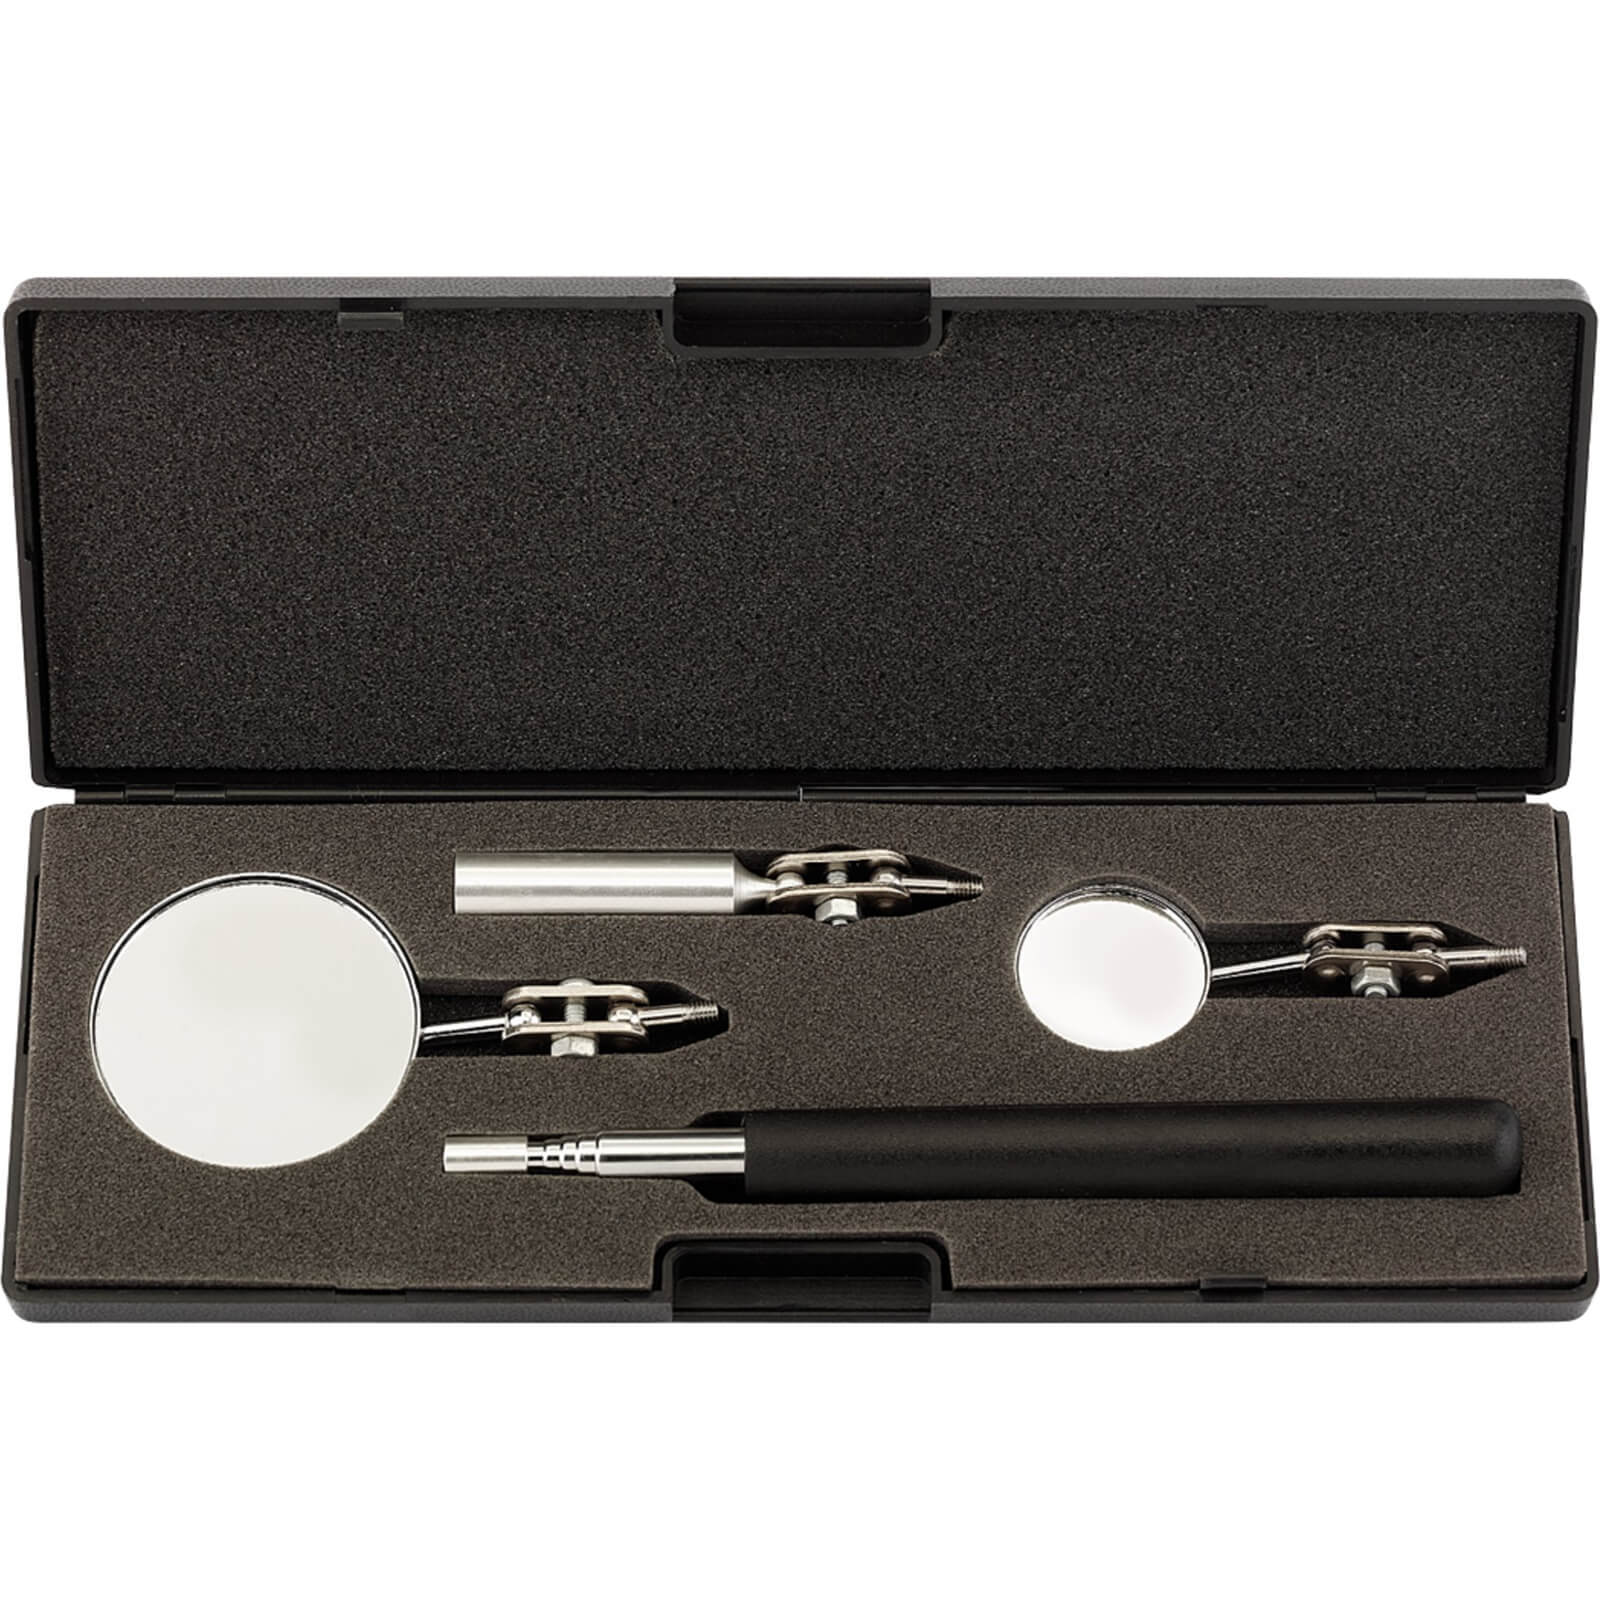 Image of Draper 4 Piece Telescopic Pick Up Tool and Inspection Mirror Set